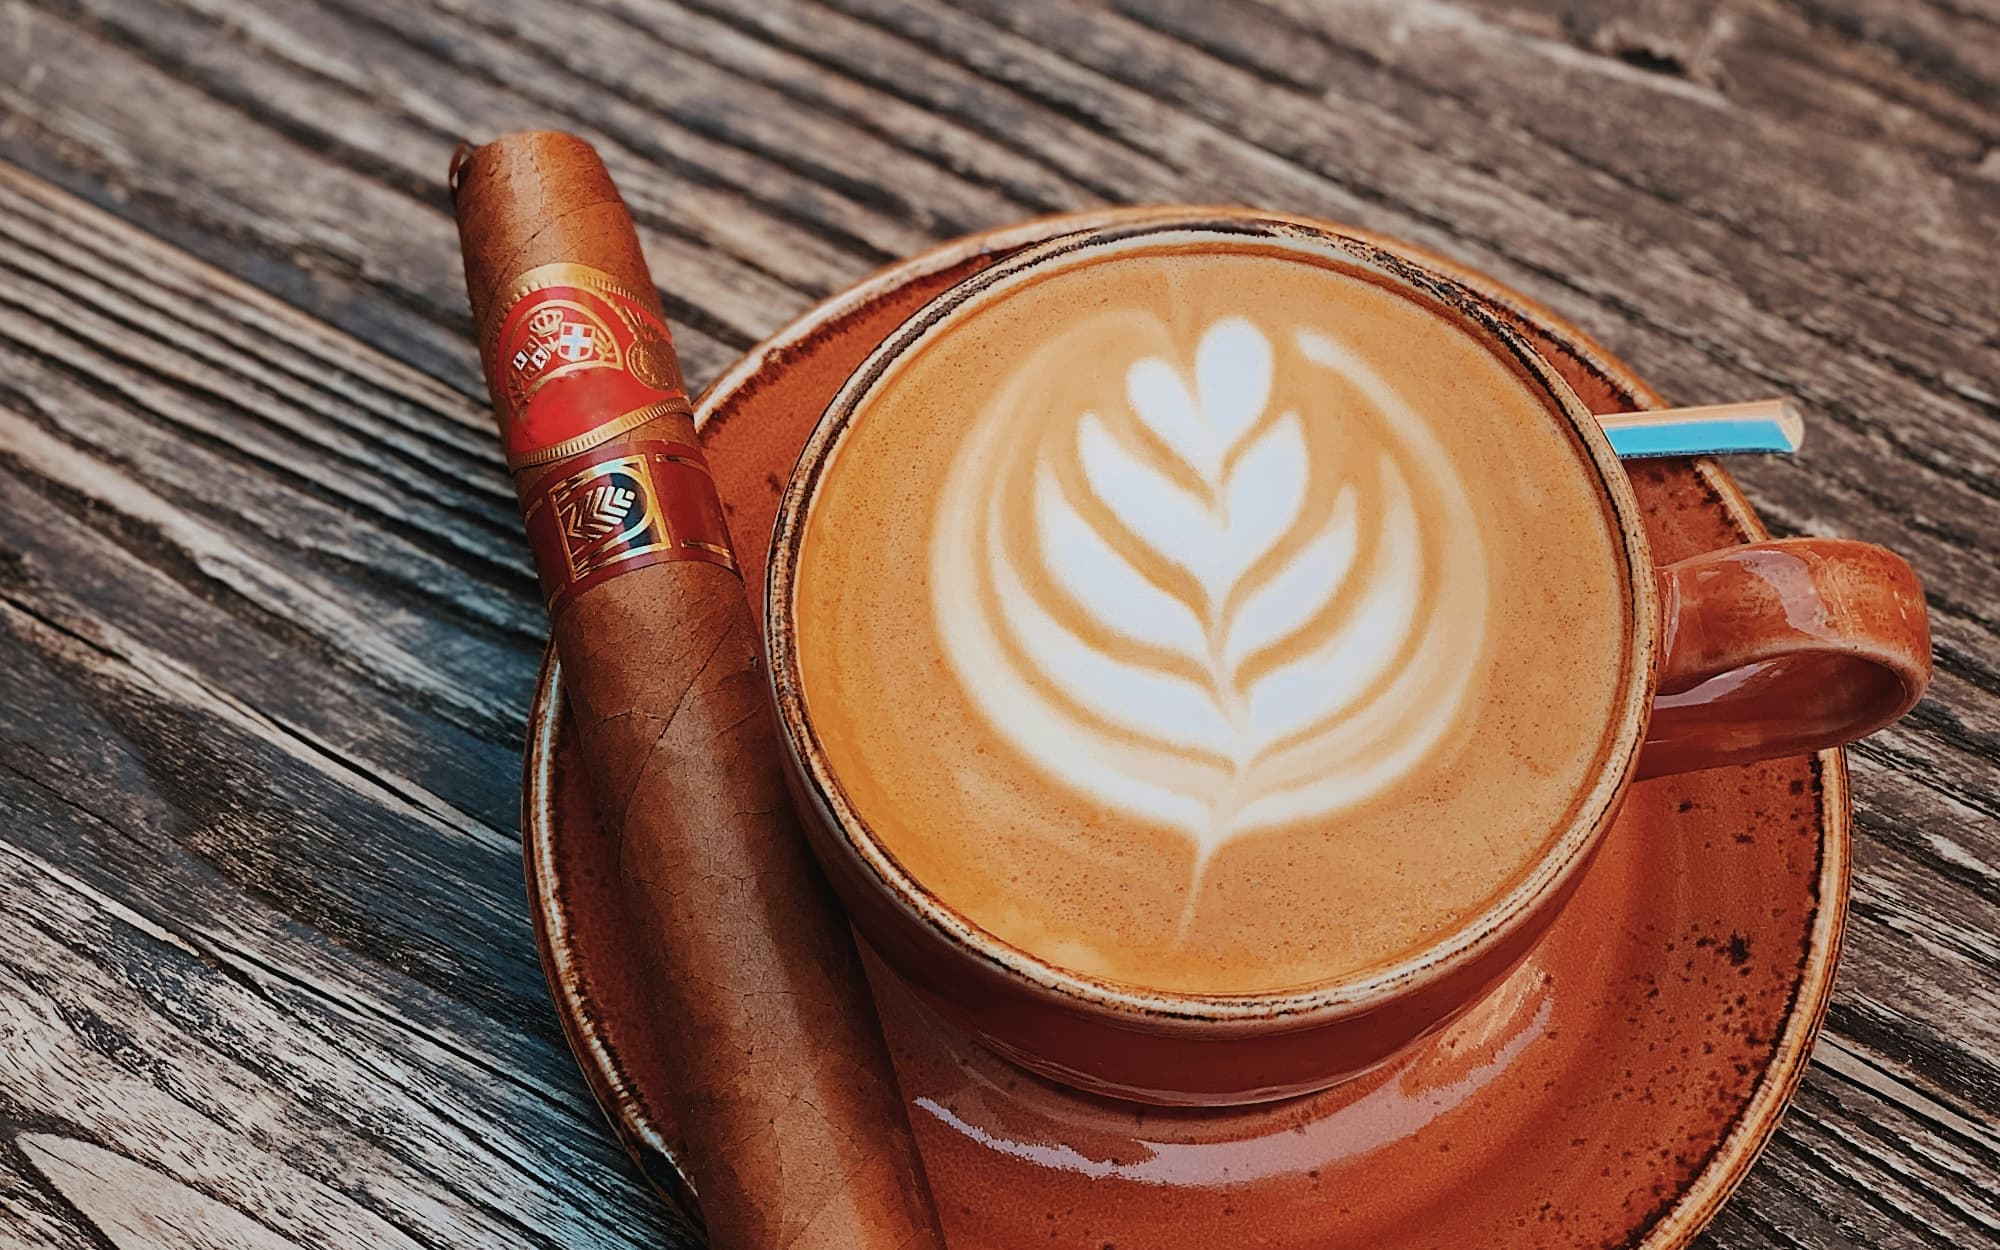 Cigar shown paired with a fine coffee.